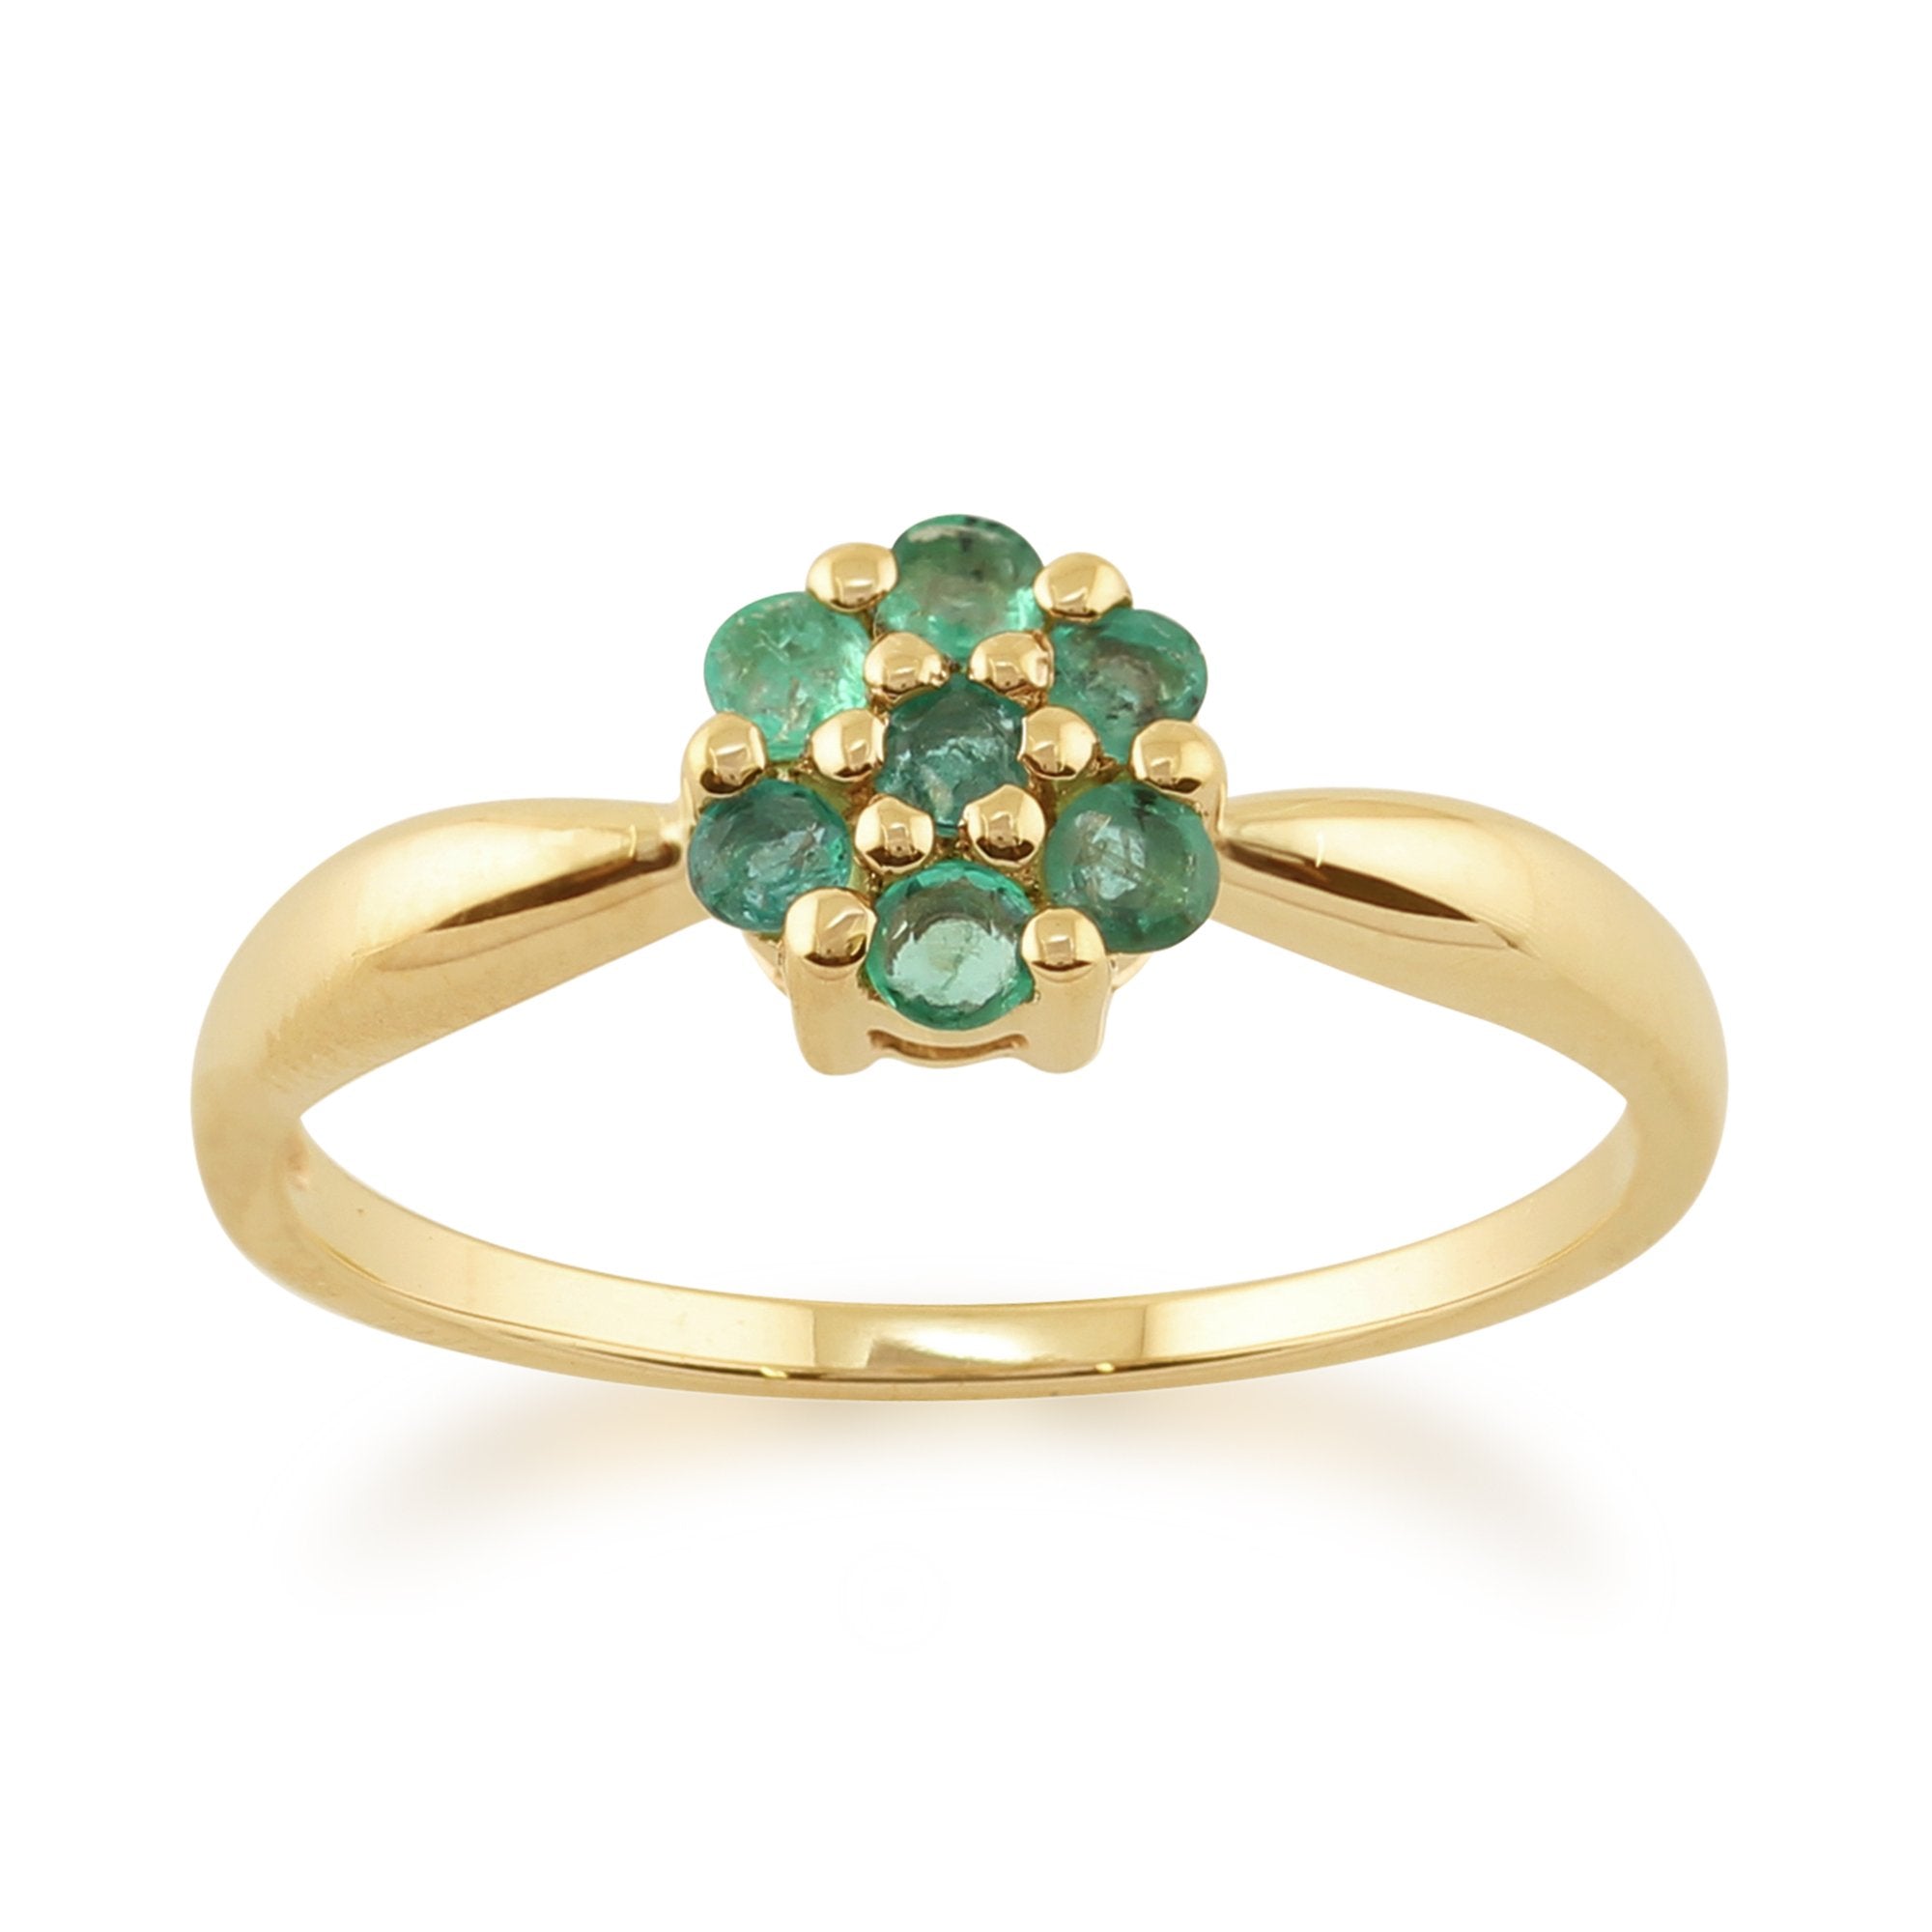 Floral Round Emerald Cluster Ring in 9ct Yellow Gold